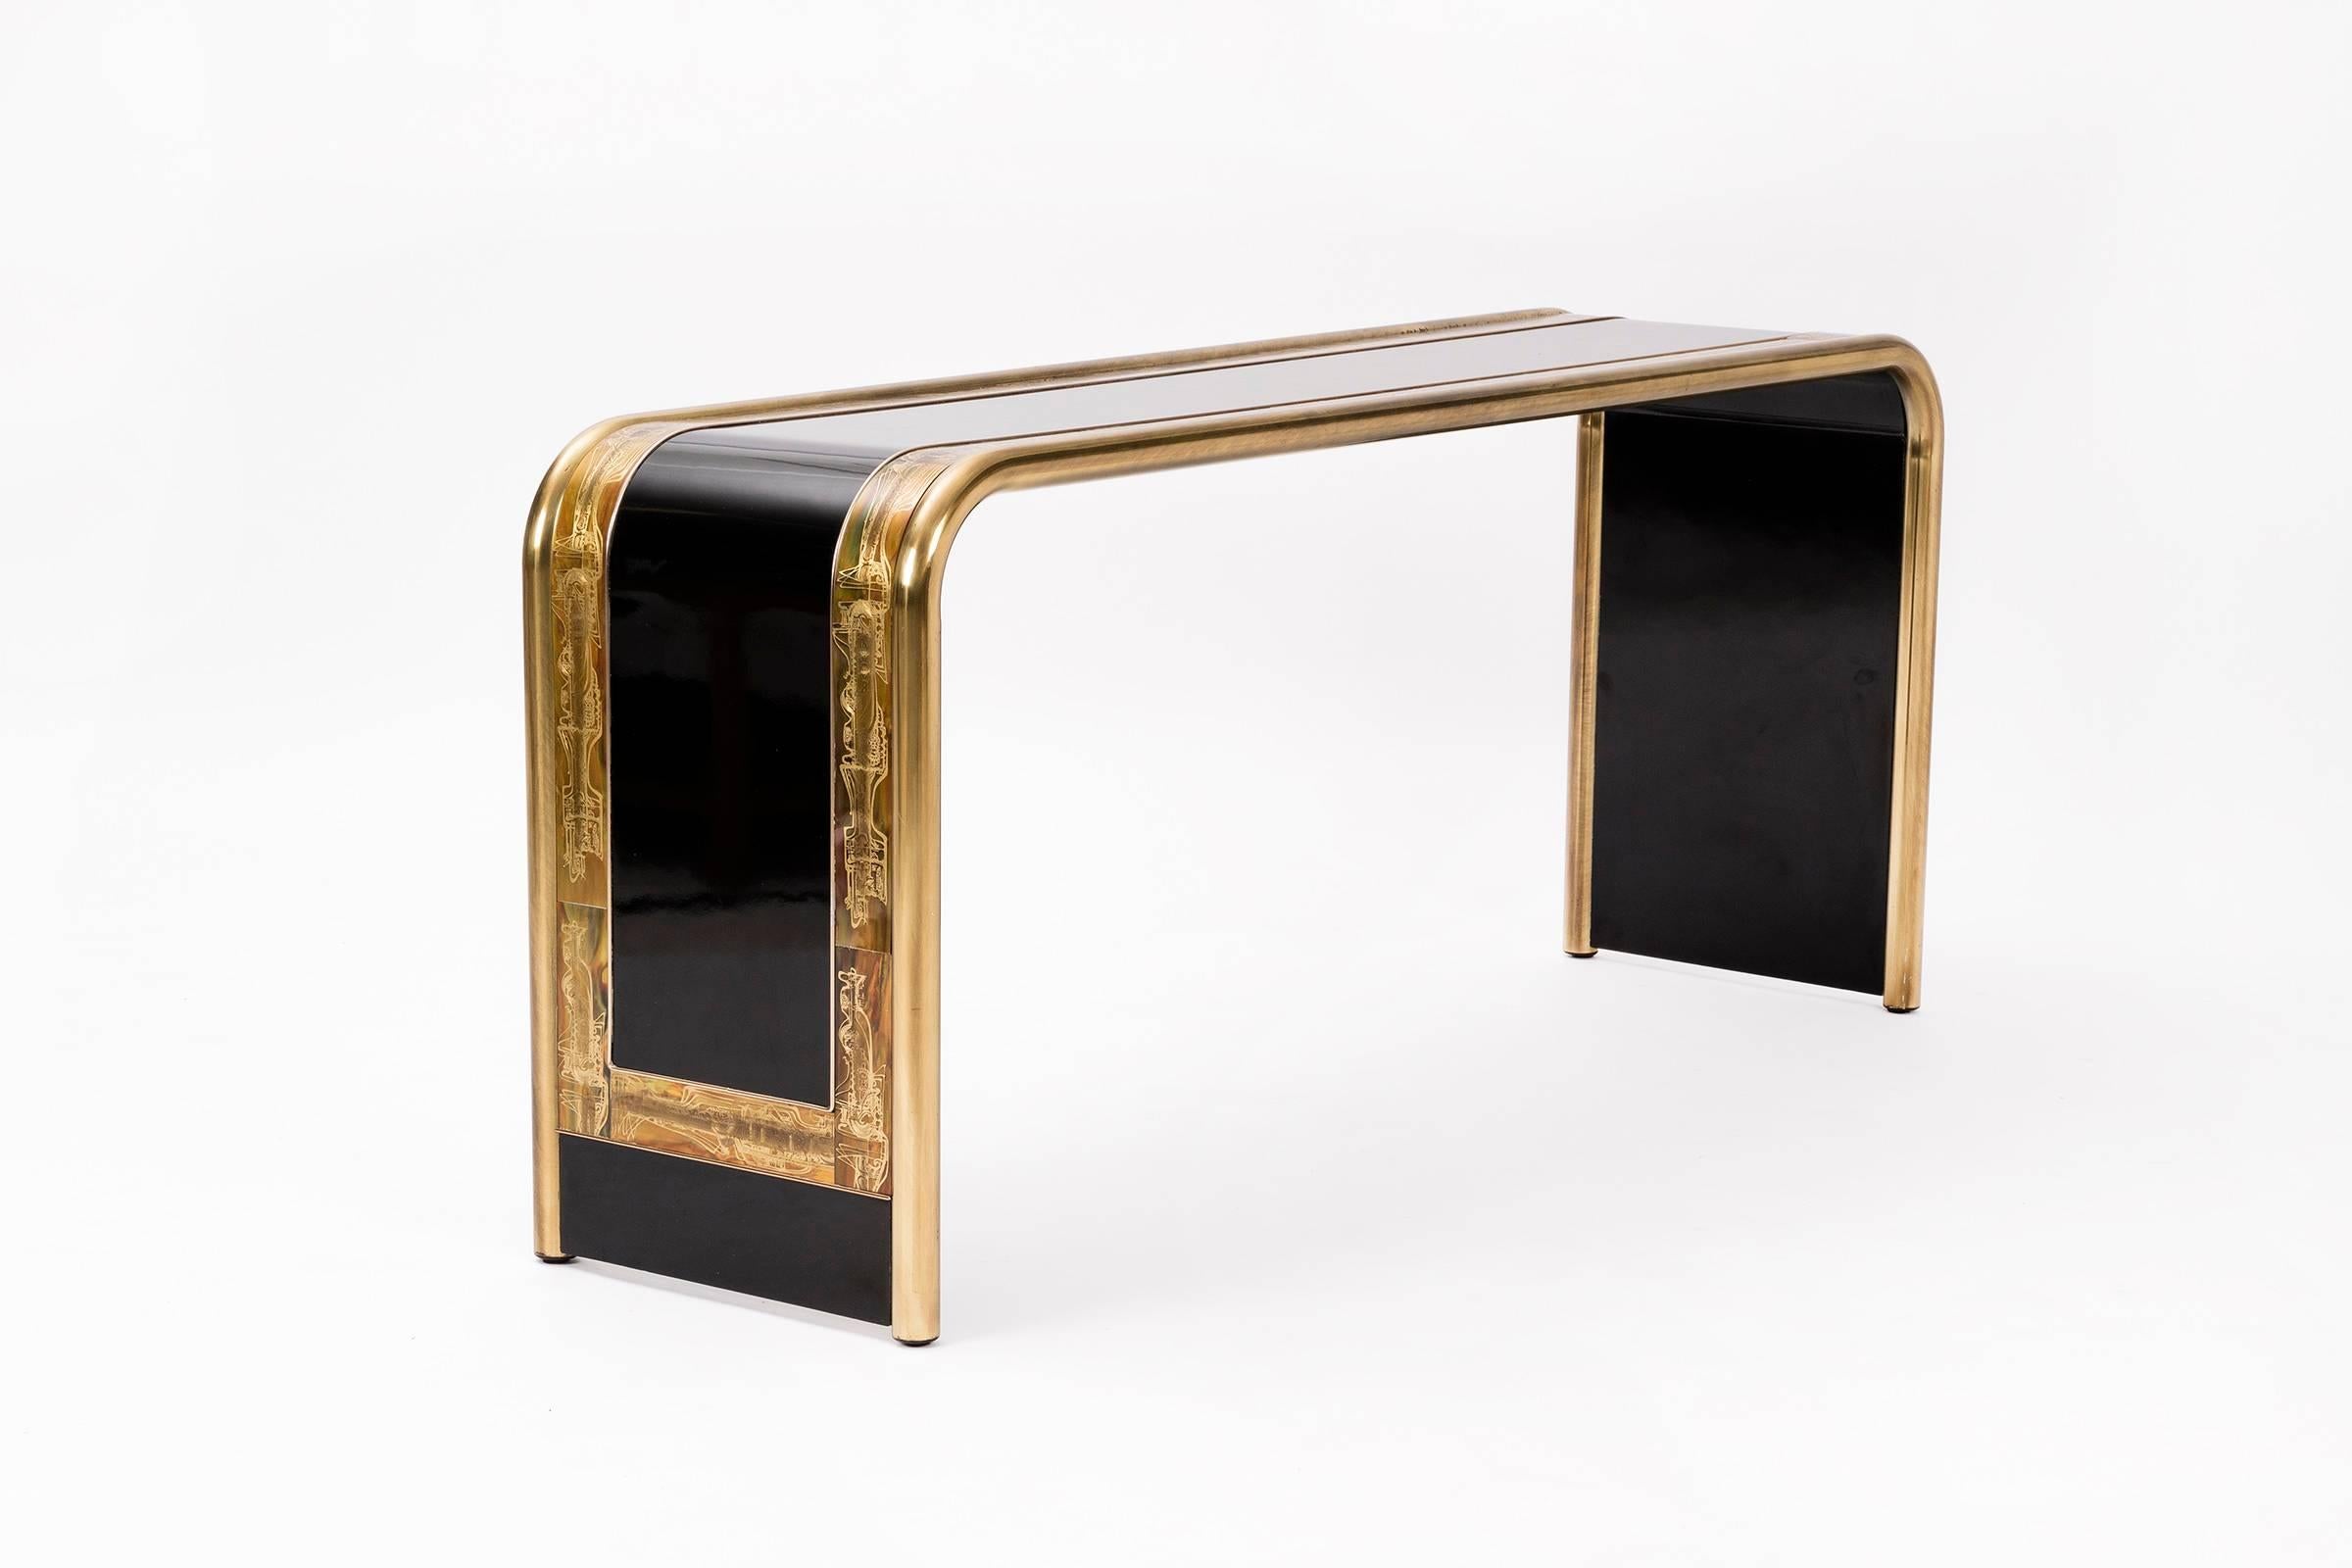 Rohne for Mastercraft console table, brass tubing with metal sides and top with brass acid etched design details.